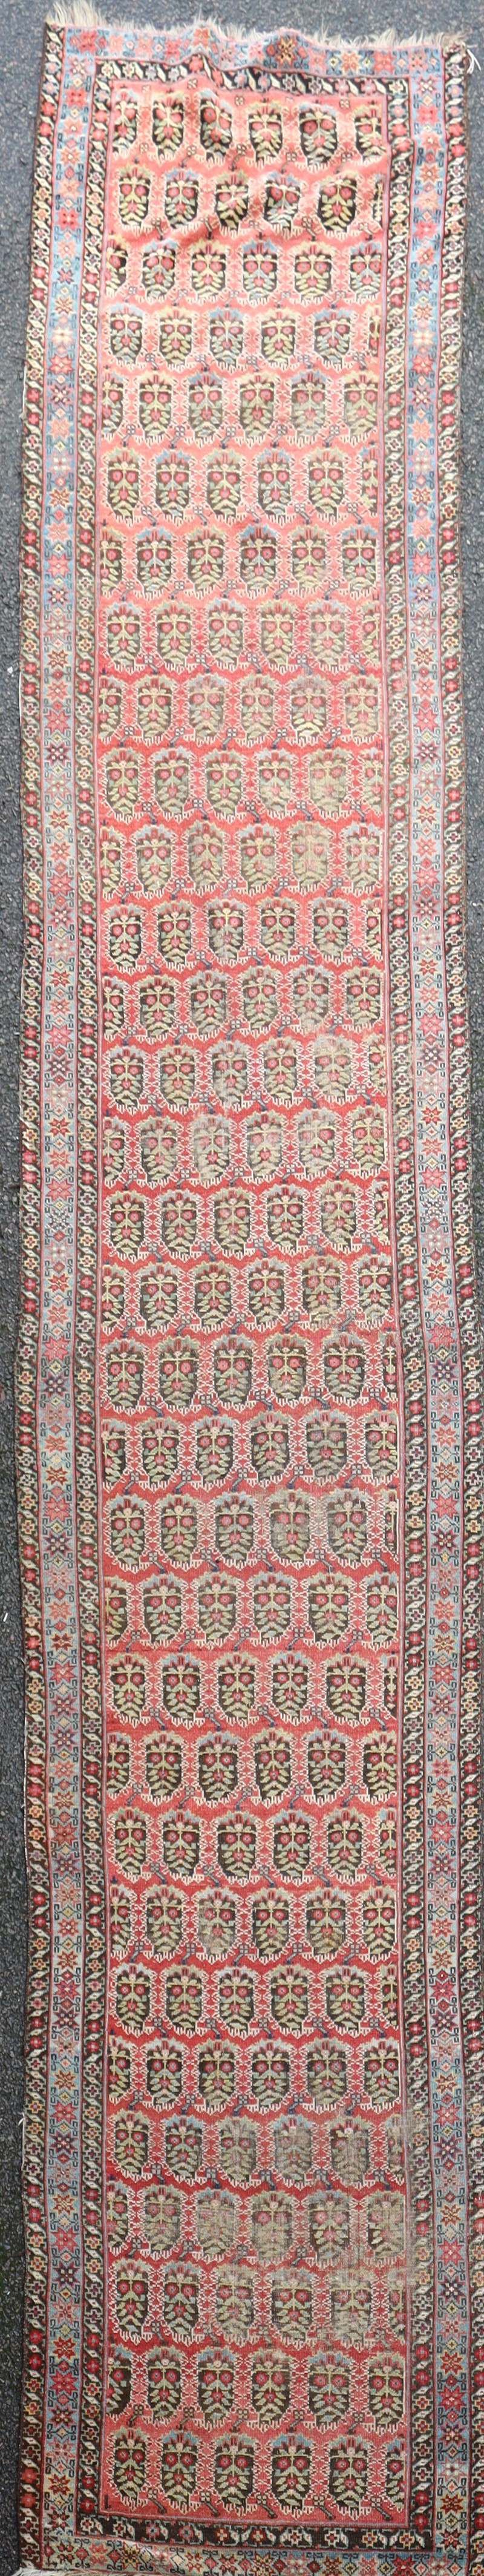 An antique Fereghan red ground runner, 16ft 6in by 3ft 6in.